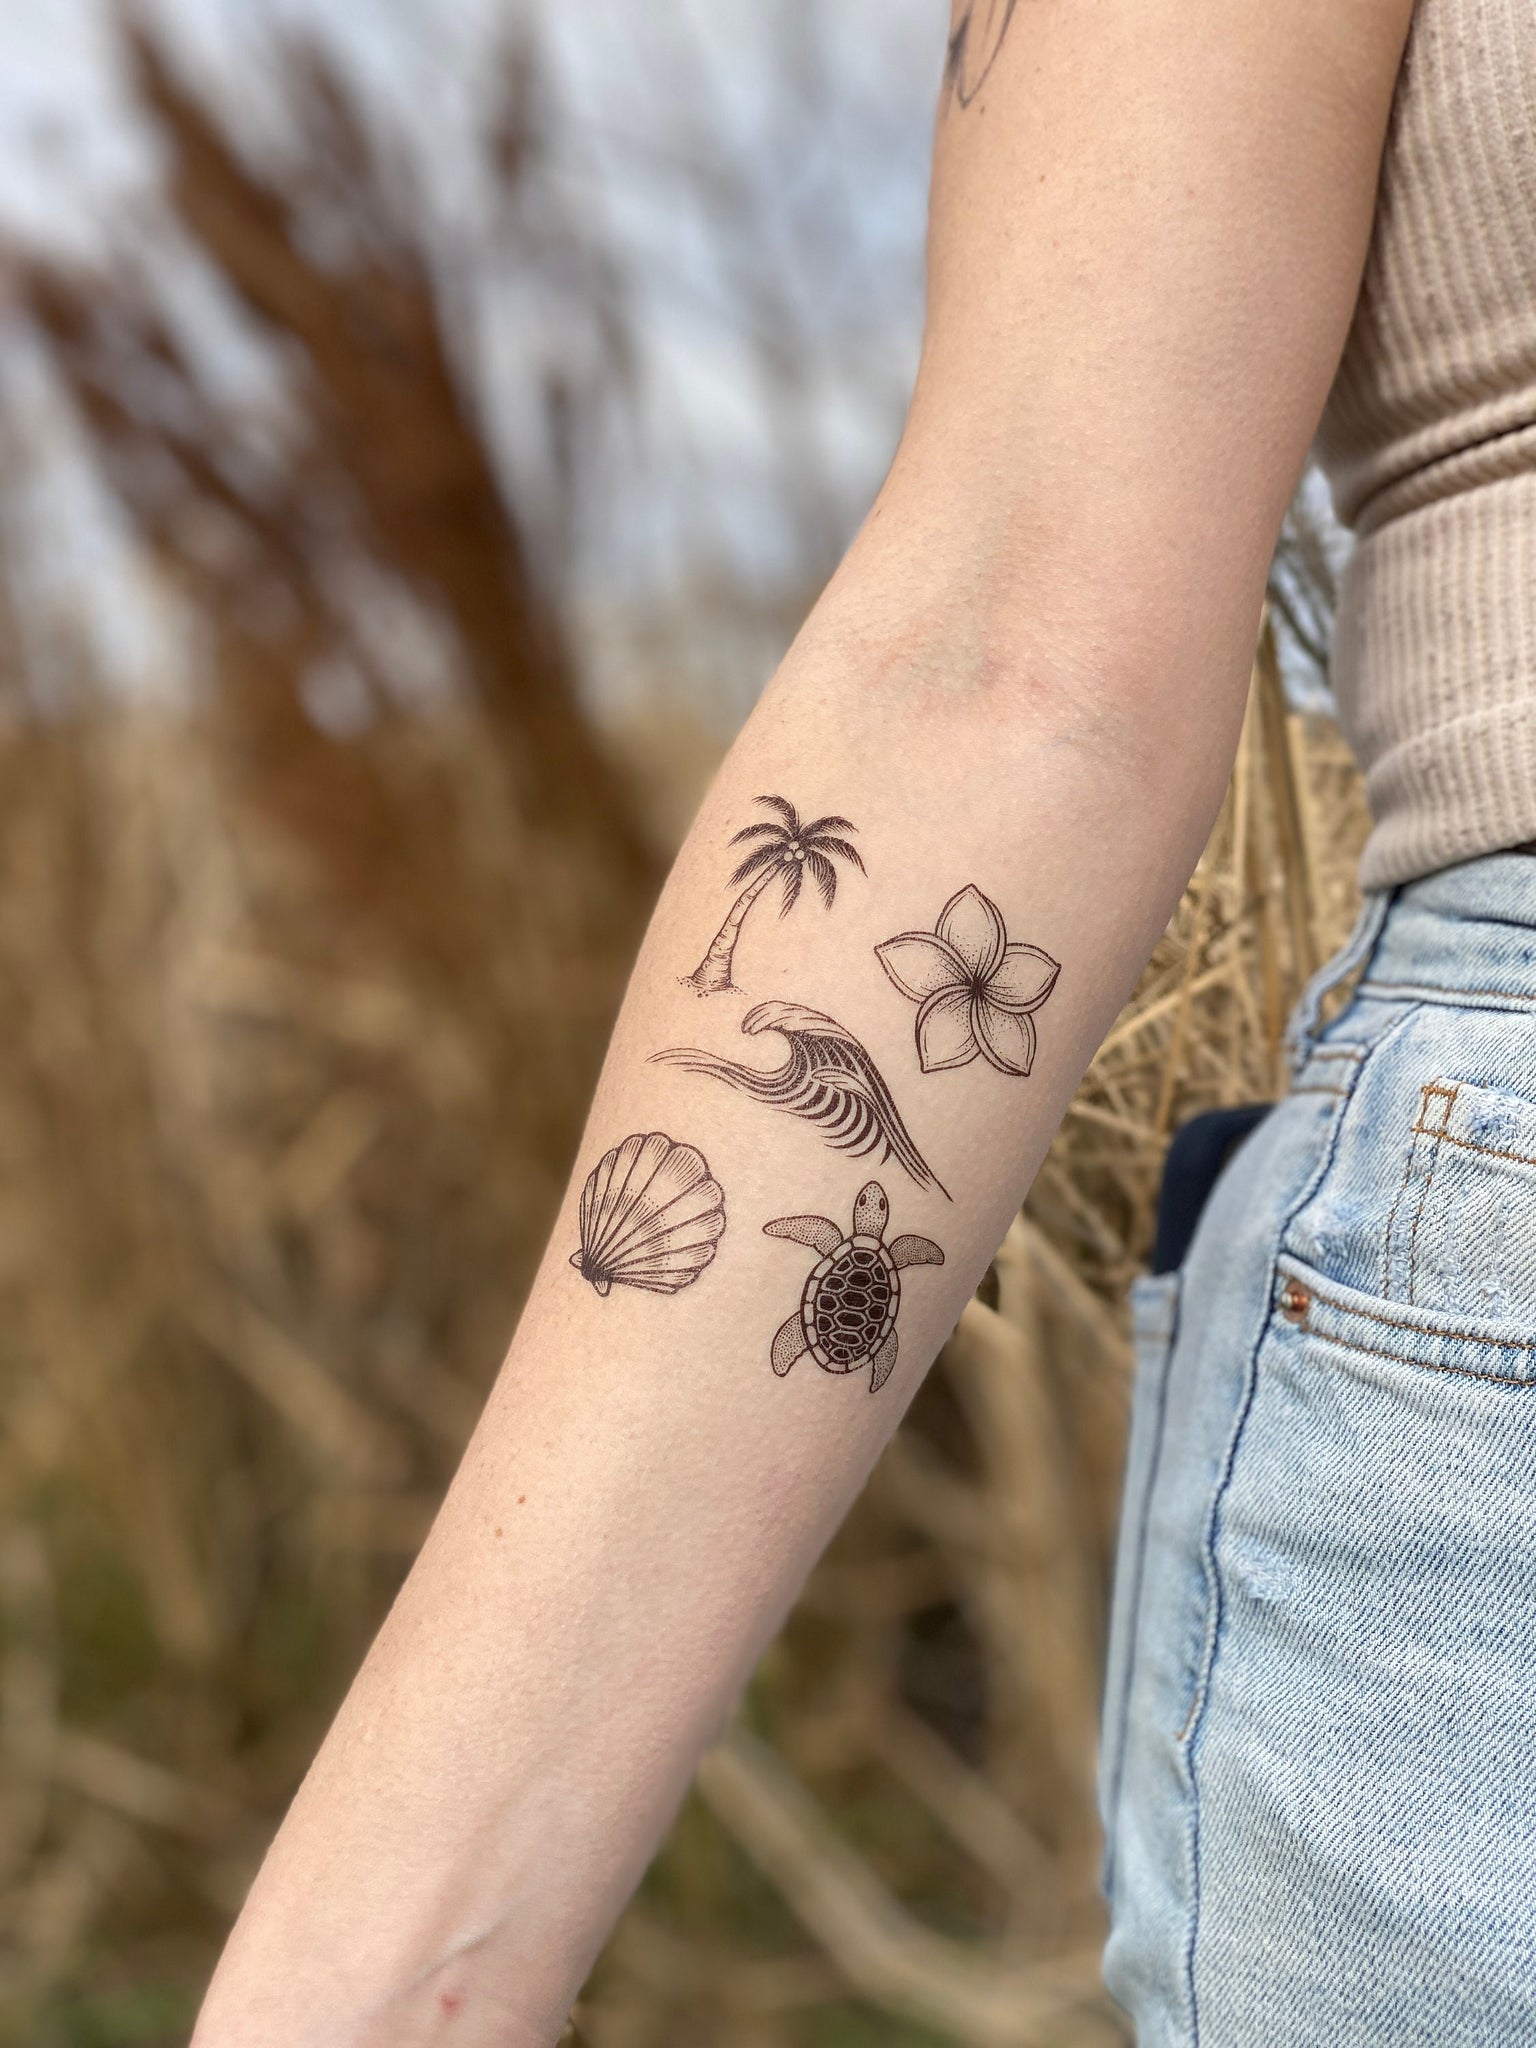 Buy Cute Sea Turtles With Bubbles Under the Sea Animal Temporary Tattoo  Ocean Beach Vacation Tattoo Online in India - Etsy